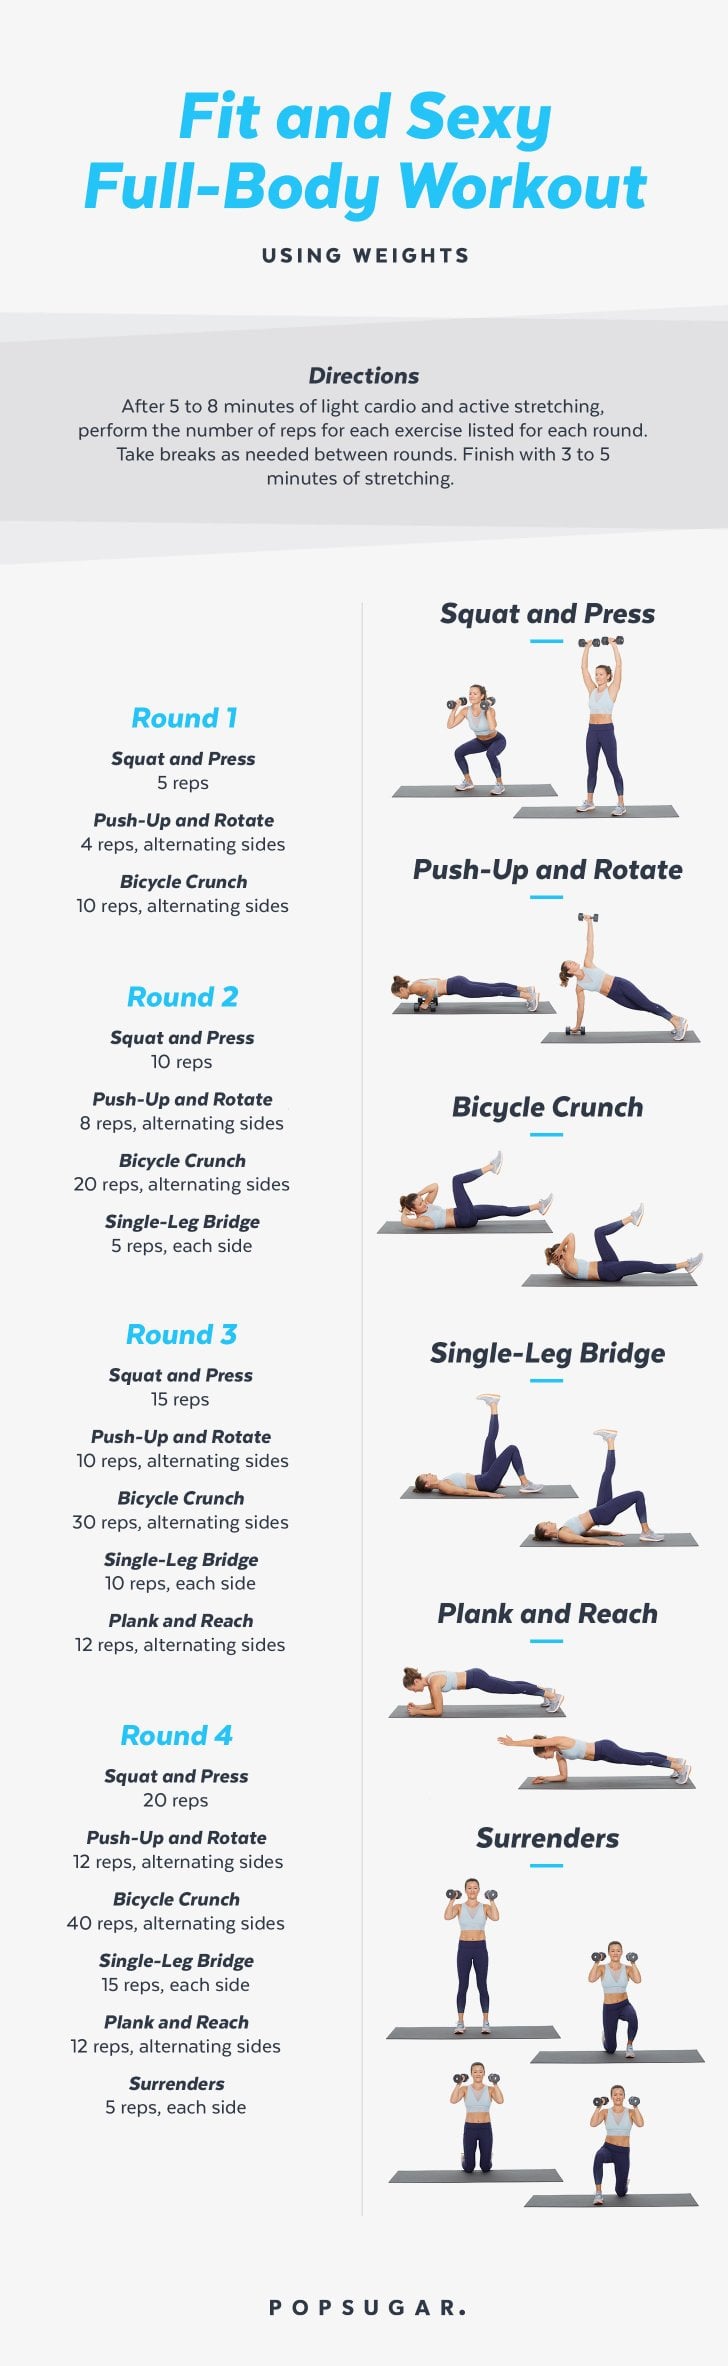 Full-Body Workout With Weights